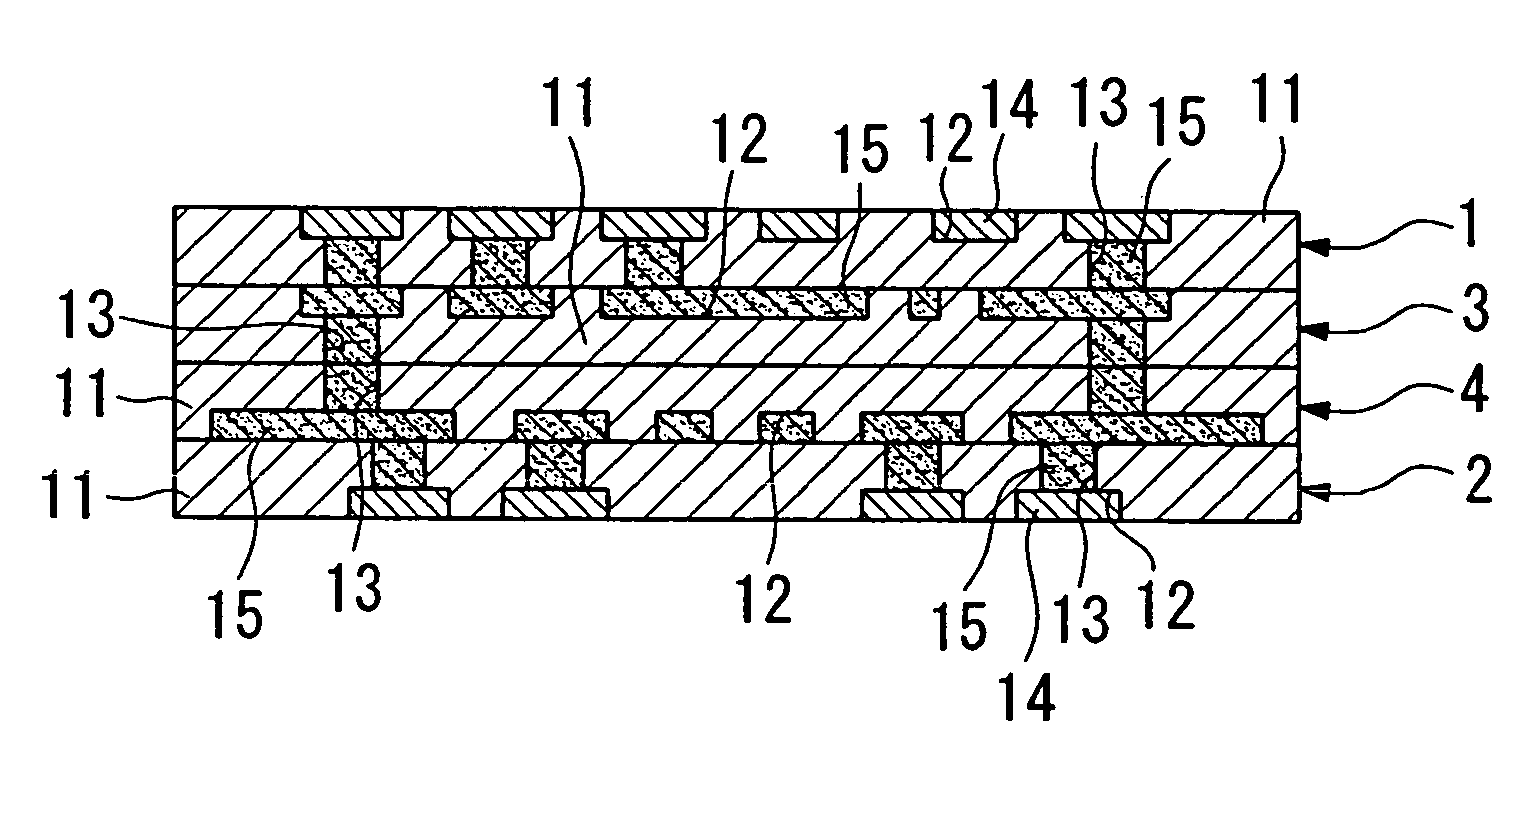 Method of manufacturing multilayer wiring board